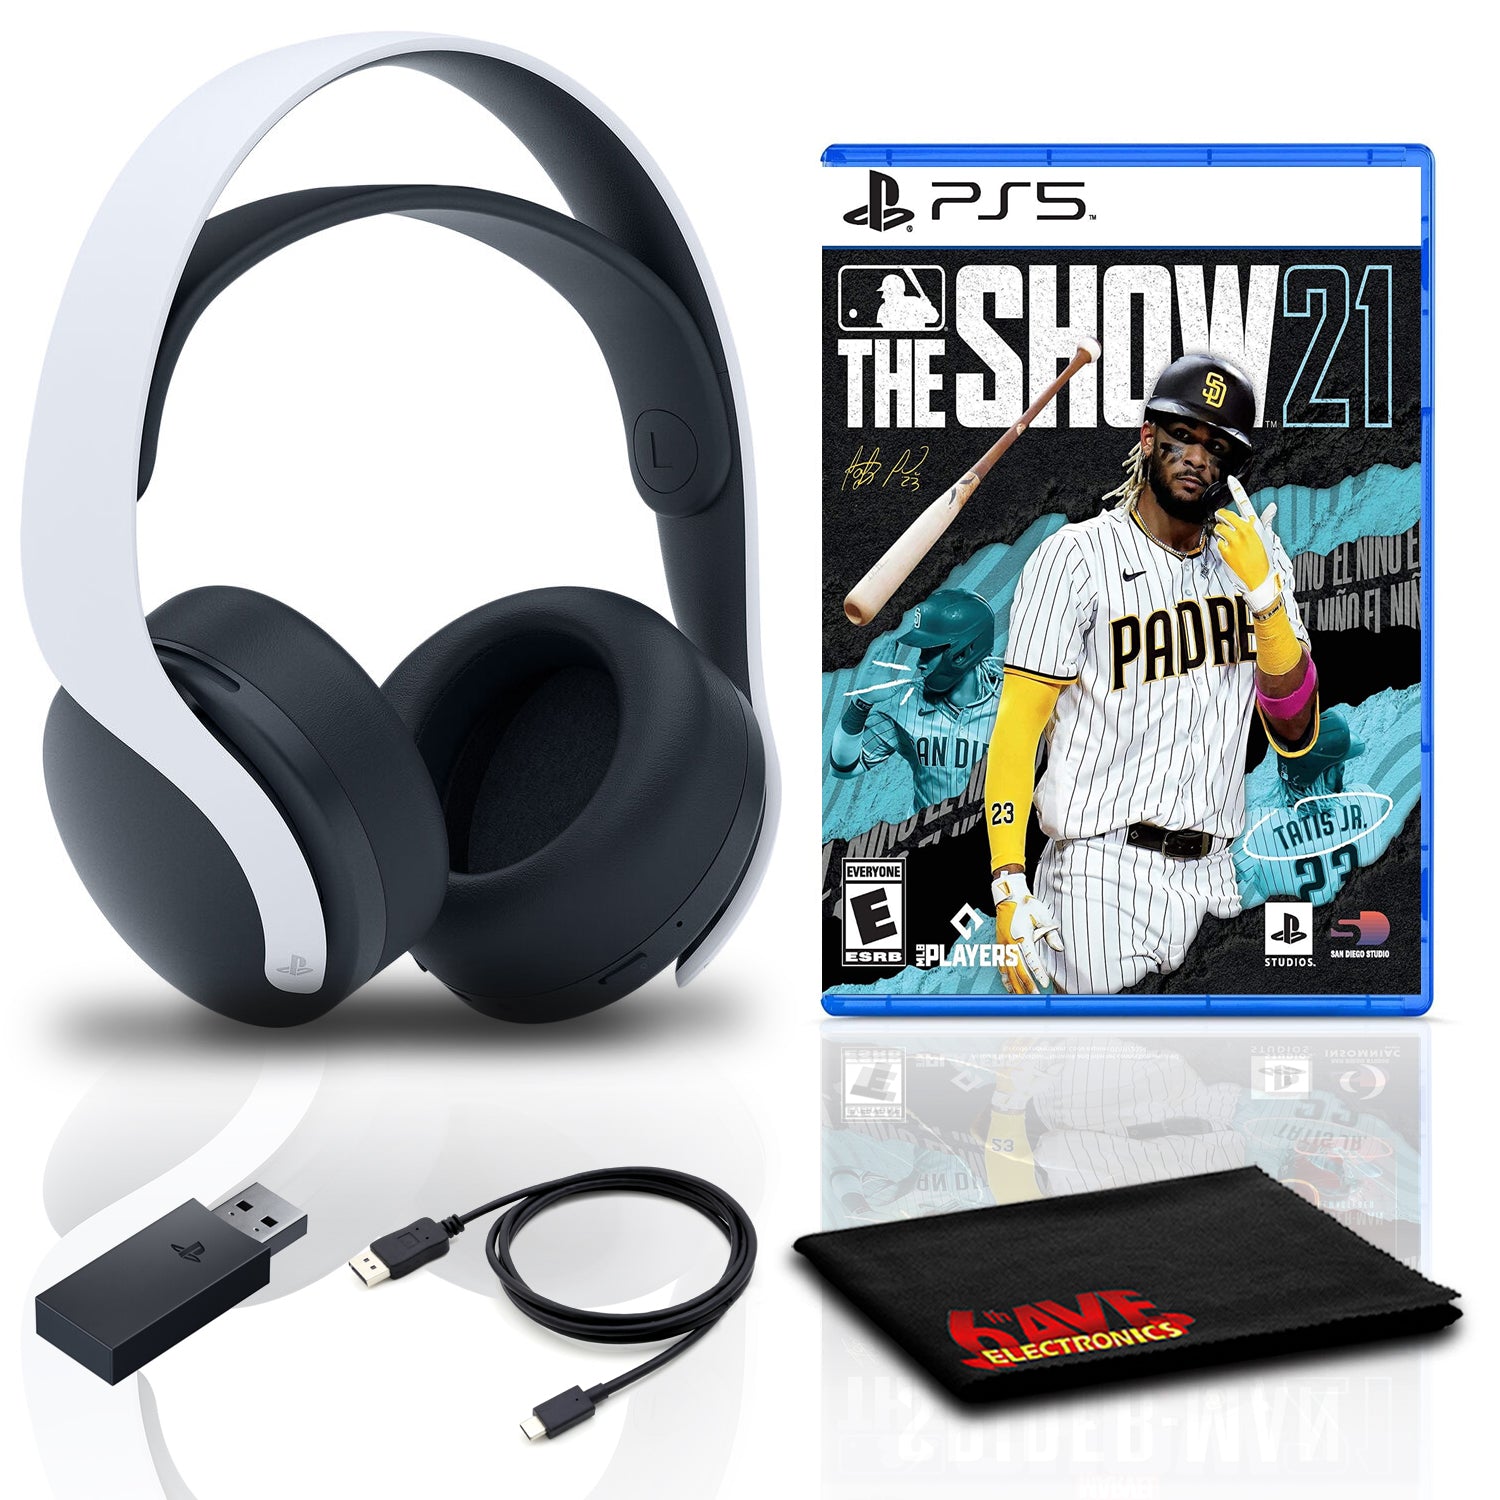 PULSE 3D Wireless Headset Bundle with MLB The Show 21 - PlayStation 5